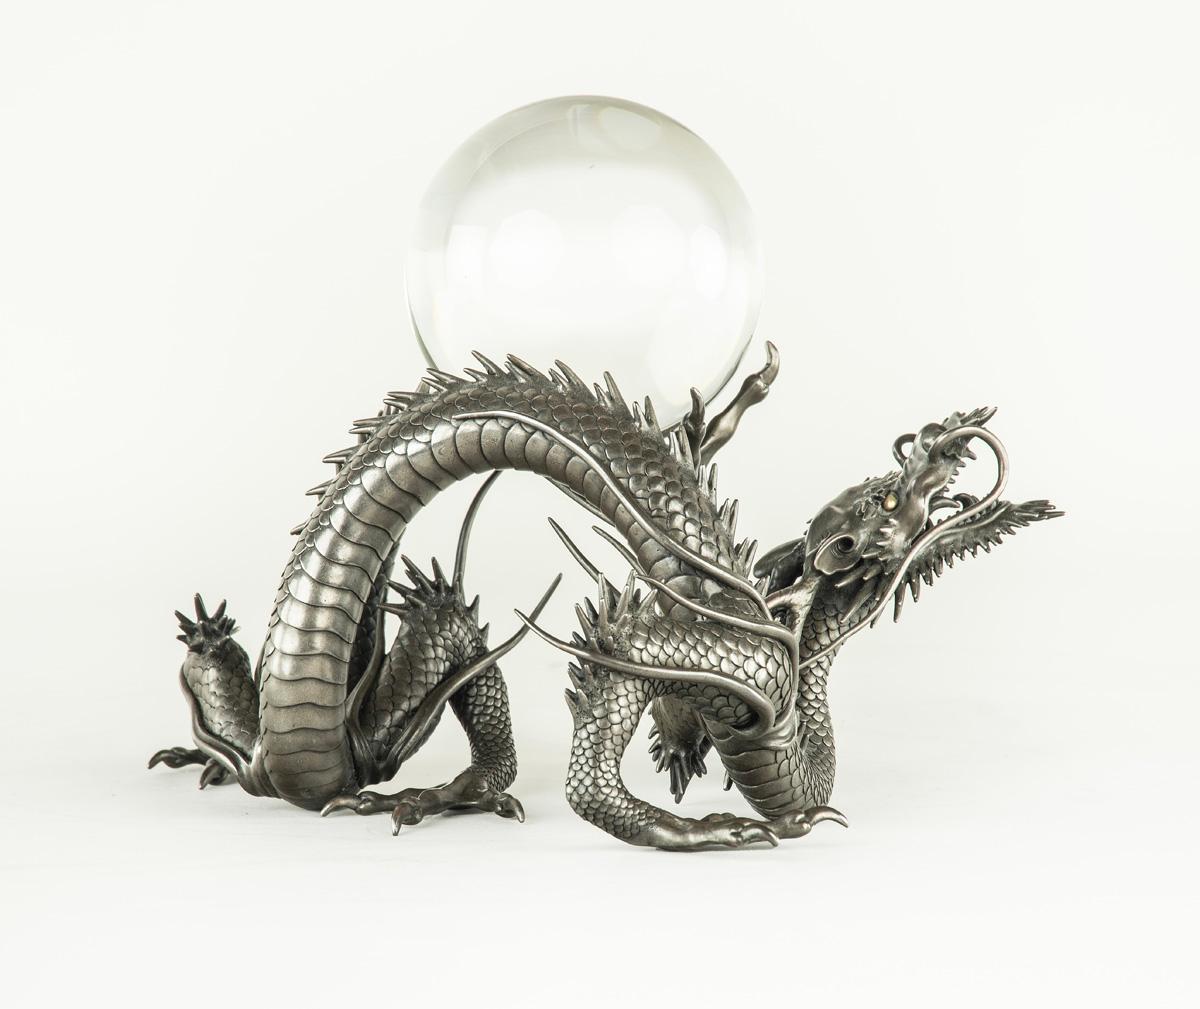 As part of our Japanese works of art collection we are delighted to offer this very rare exceptional quality Meiji Period (1868-1912), cast shibuichi okimono of a writhing dragon resting a large glass sphere upon his back, the sphere representing